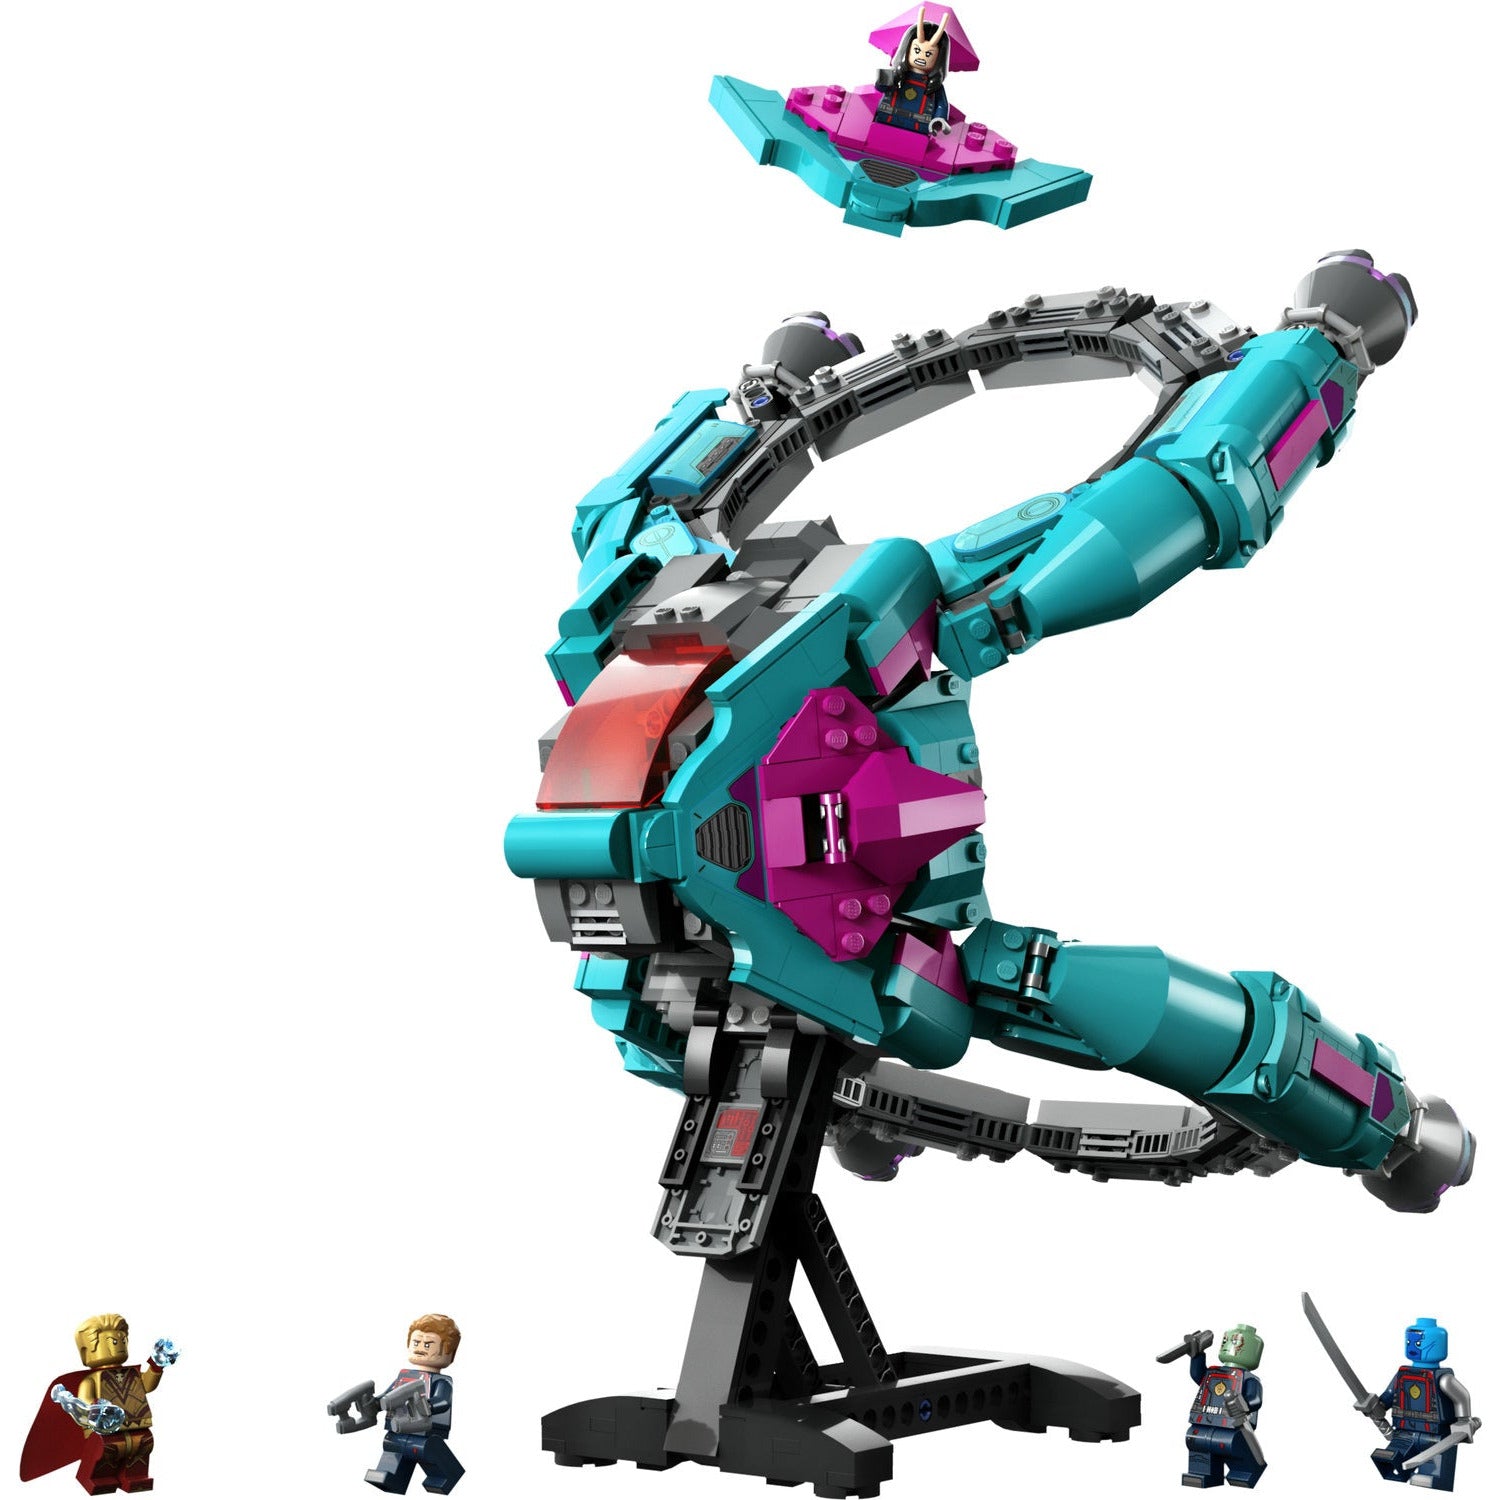 Lego Marvel Super Heroes The New Guardians' Ship